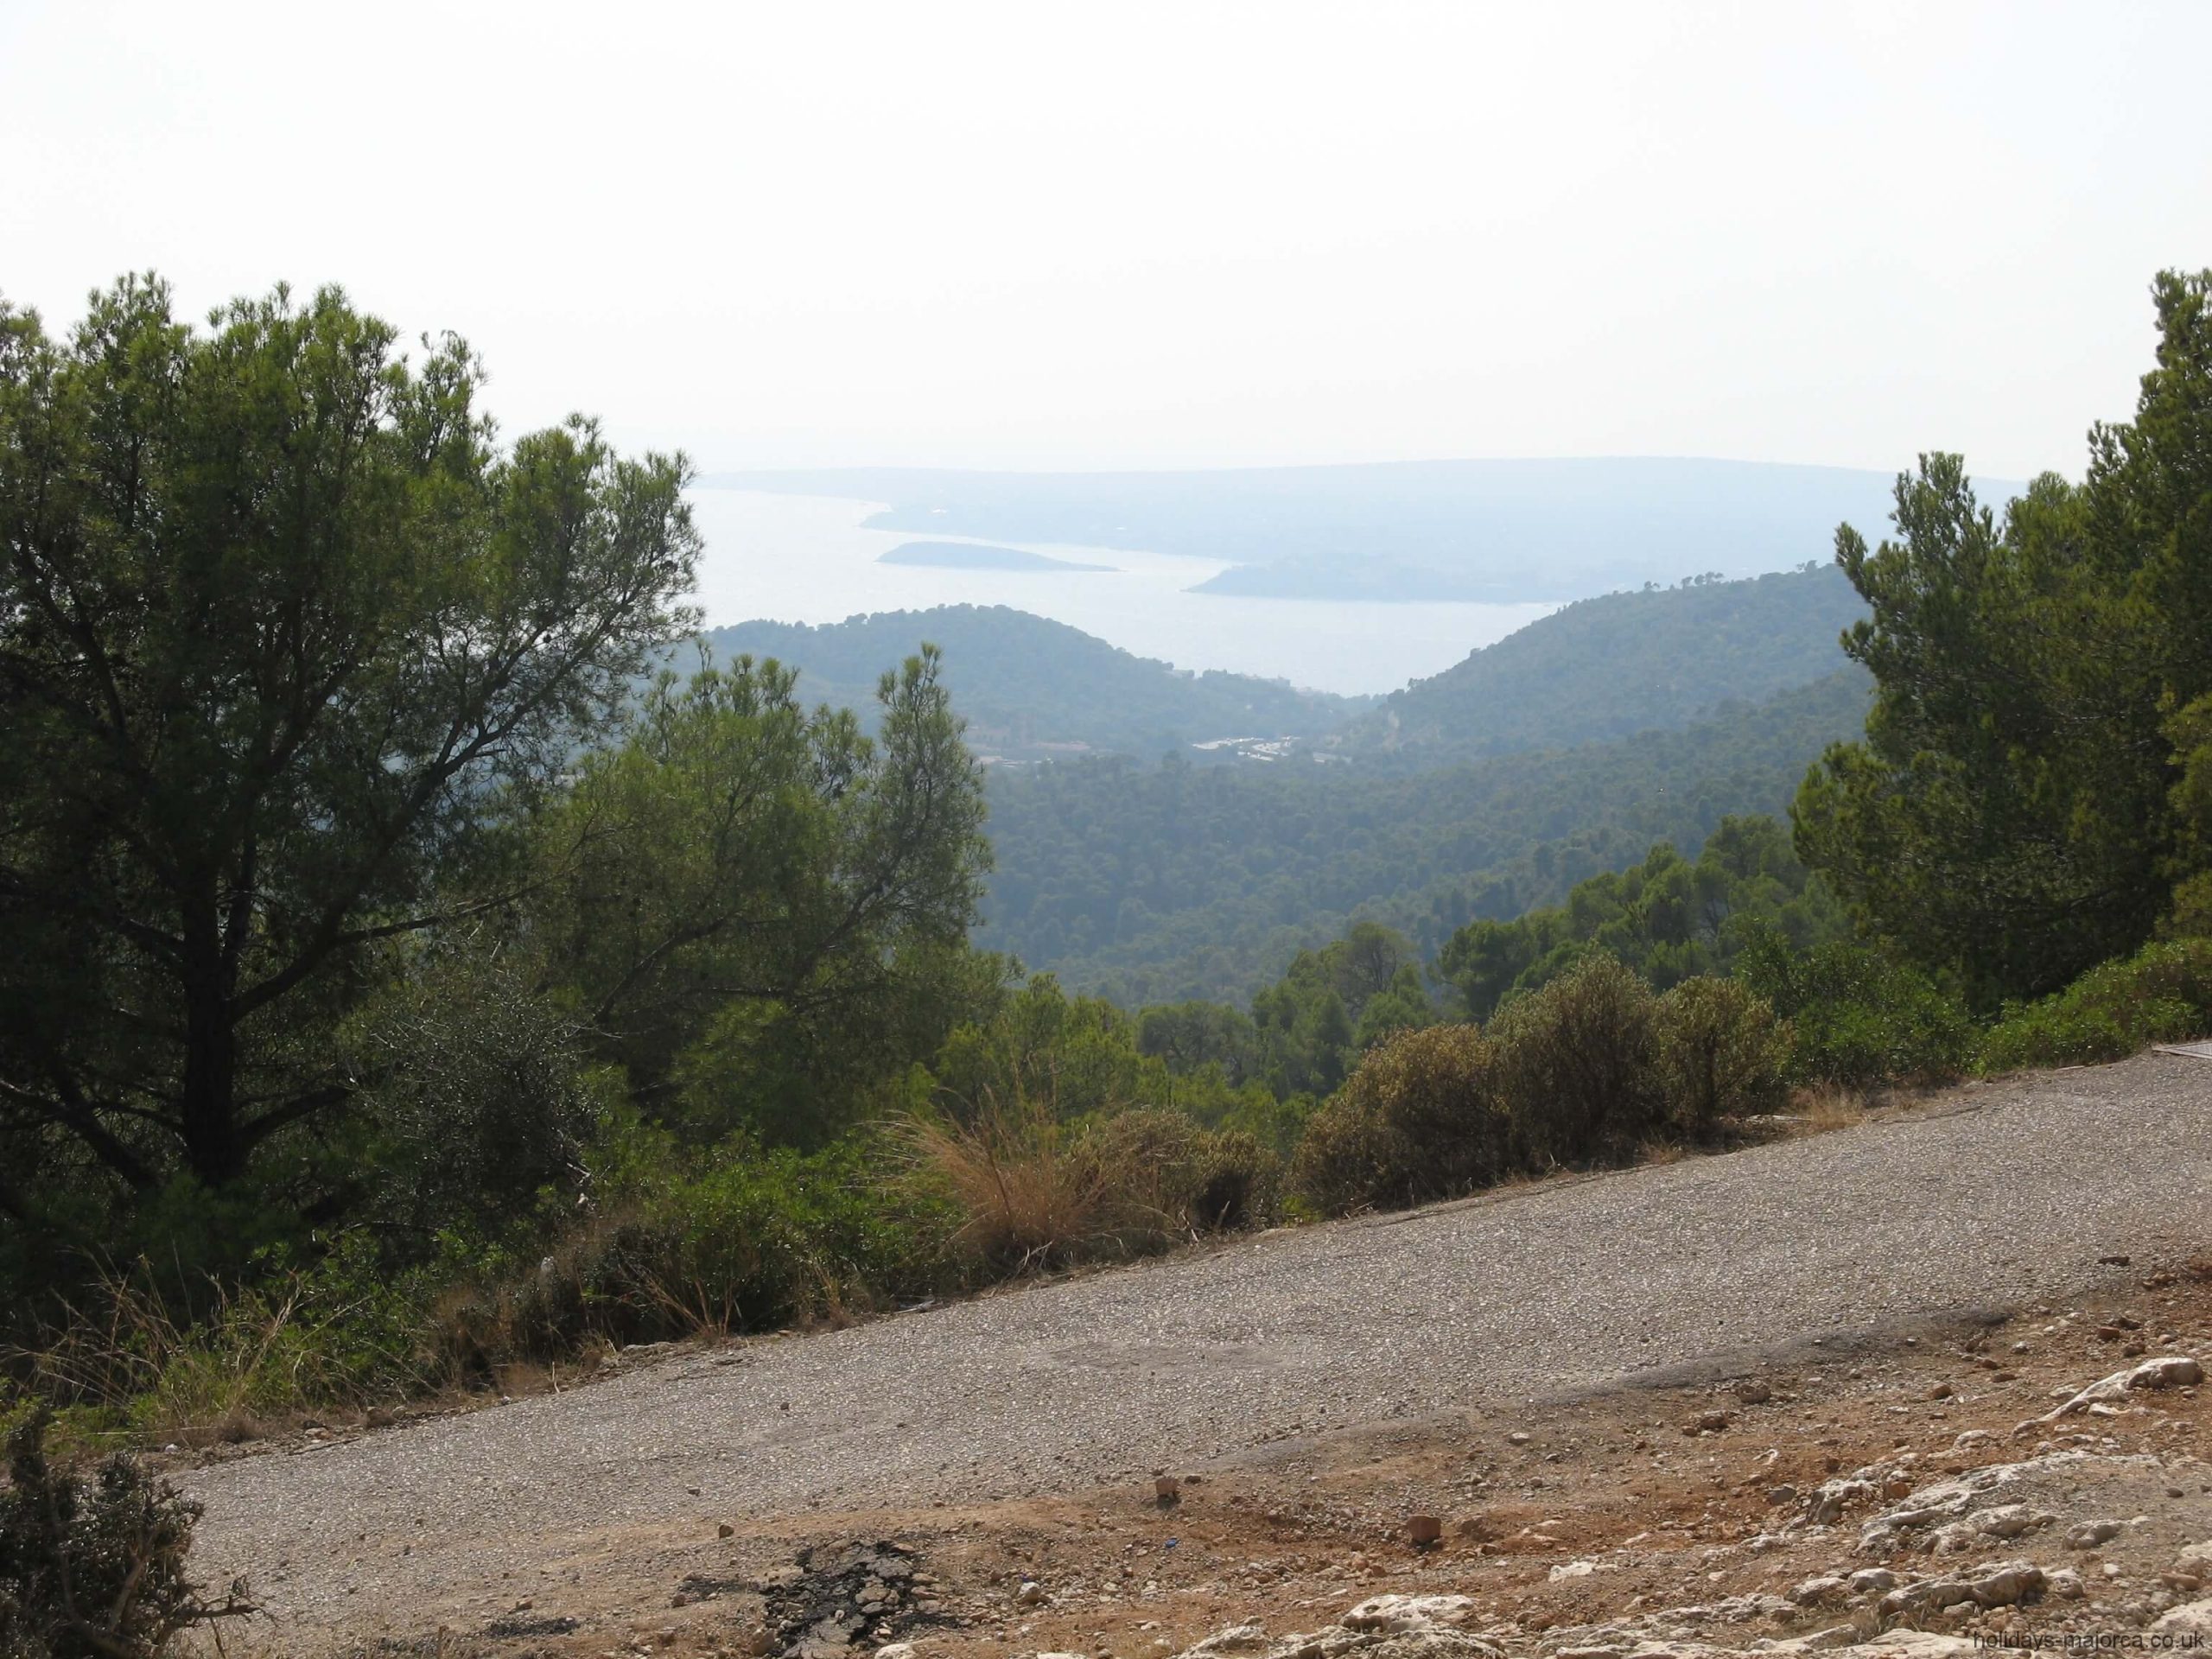 View from Na Burguesa over Magaluf bay Majorca with road up to top of hill